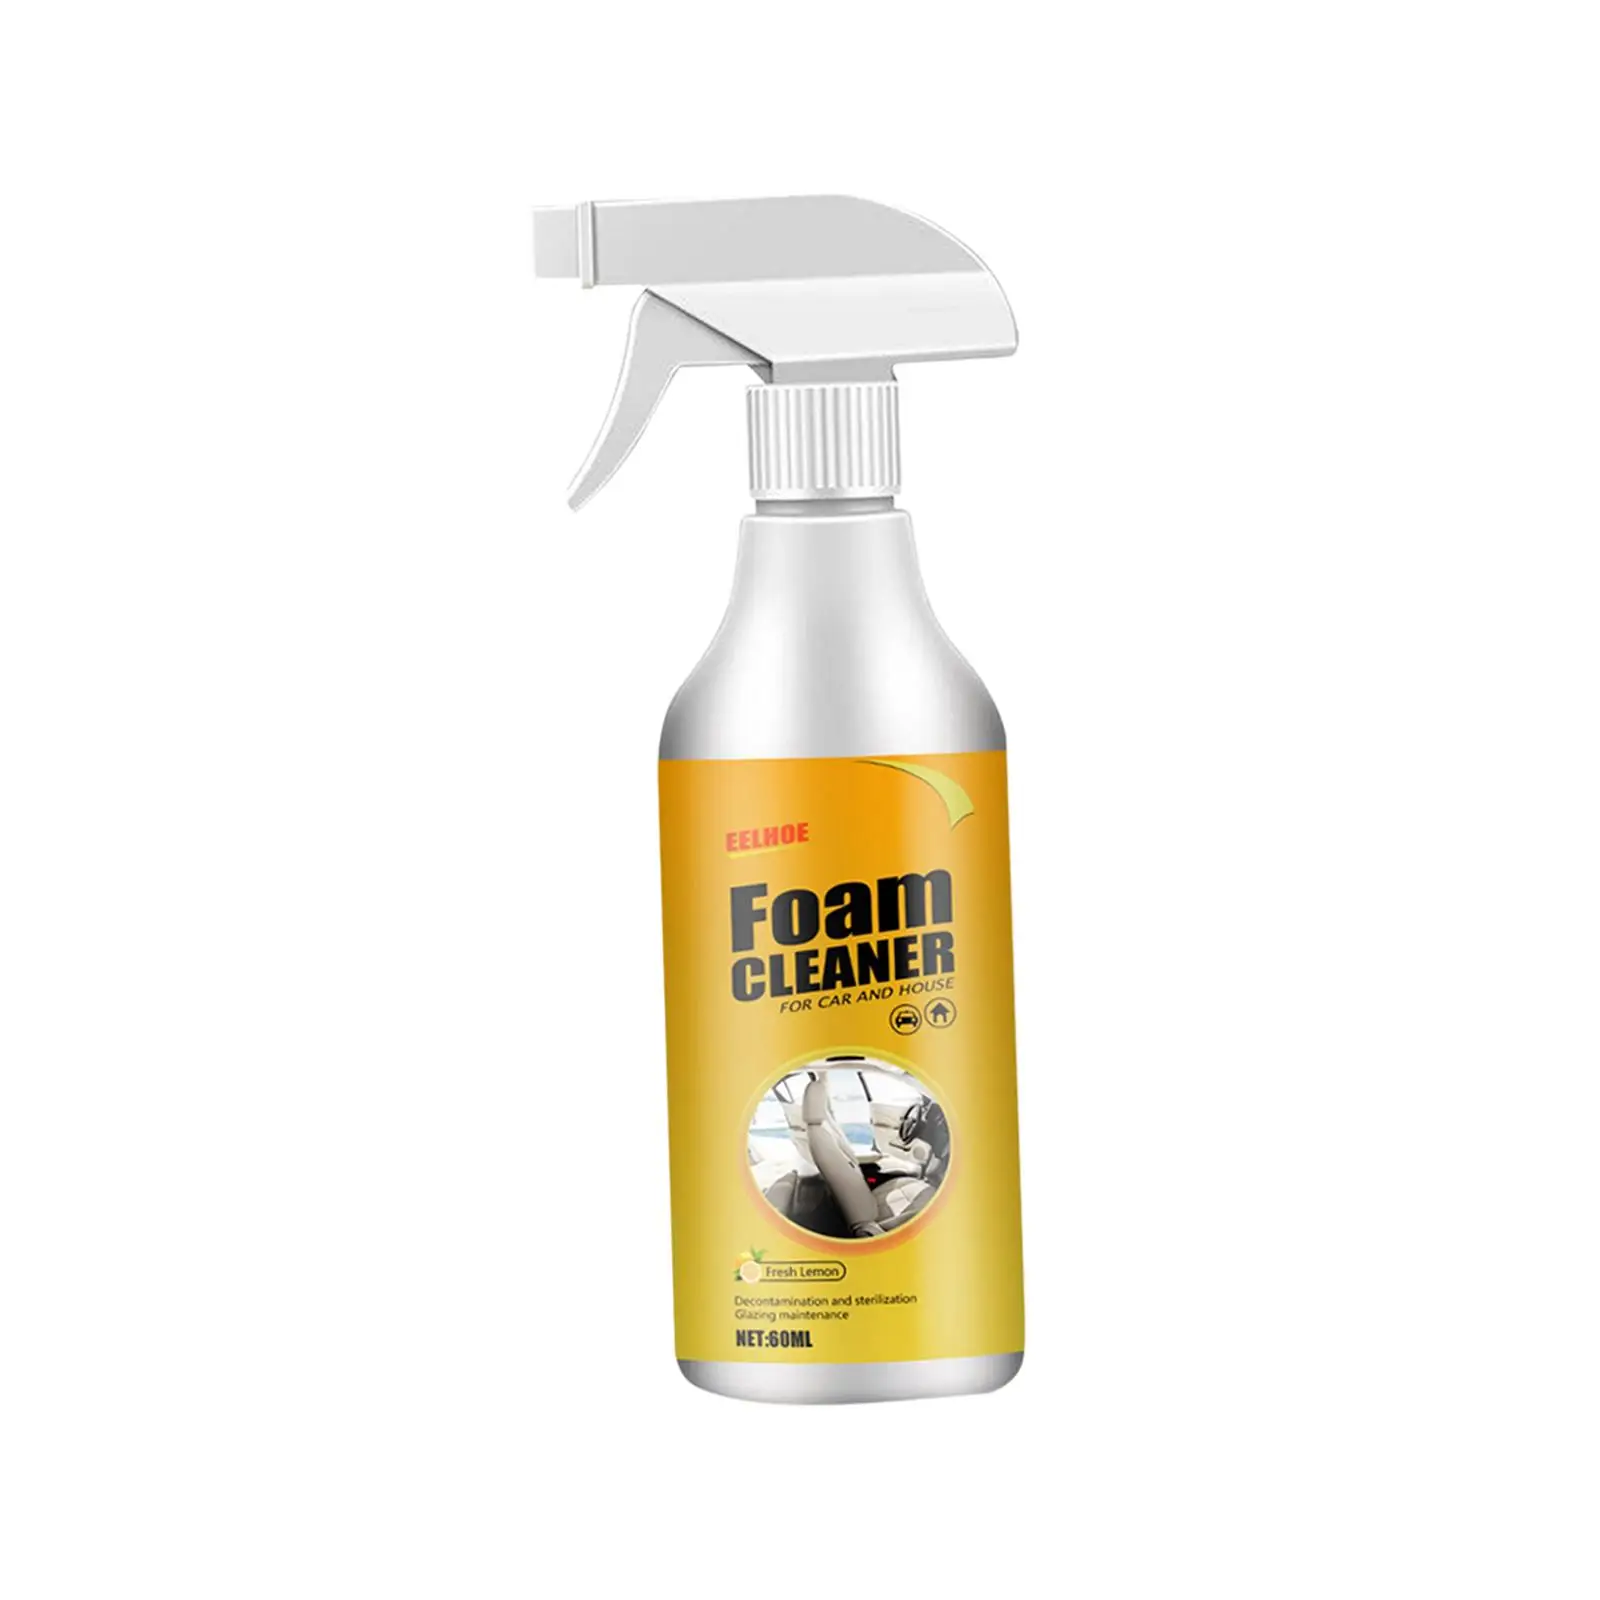 Car Foam Cleaner Car Interior Cleaning Spray for Car Ceiling Seat House